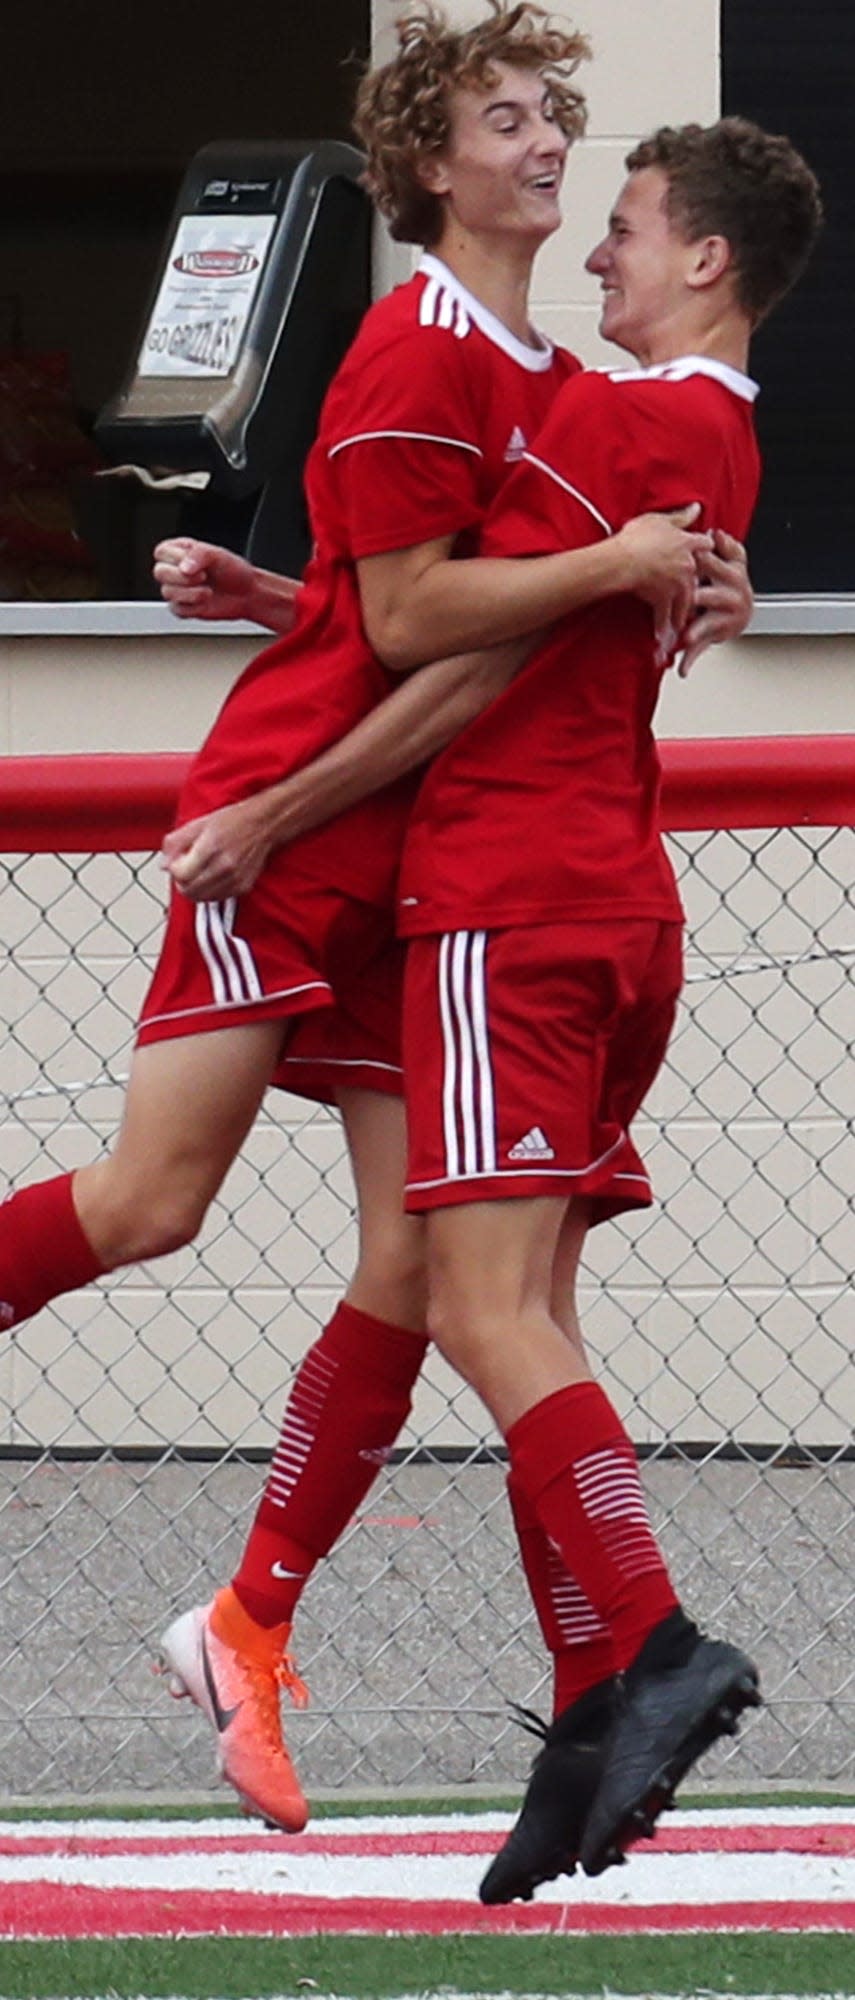 Wadsworth's Jackson Herbert, left, celebrates has been a lifelong fan of Akron men's soccer. In the fall of 2023, he'll serve as a player after committing to the Zips.